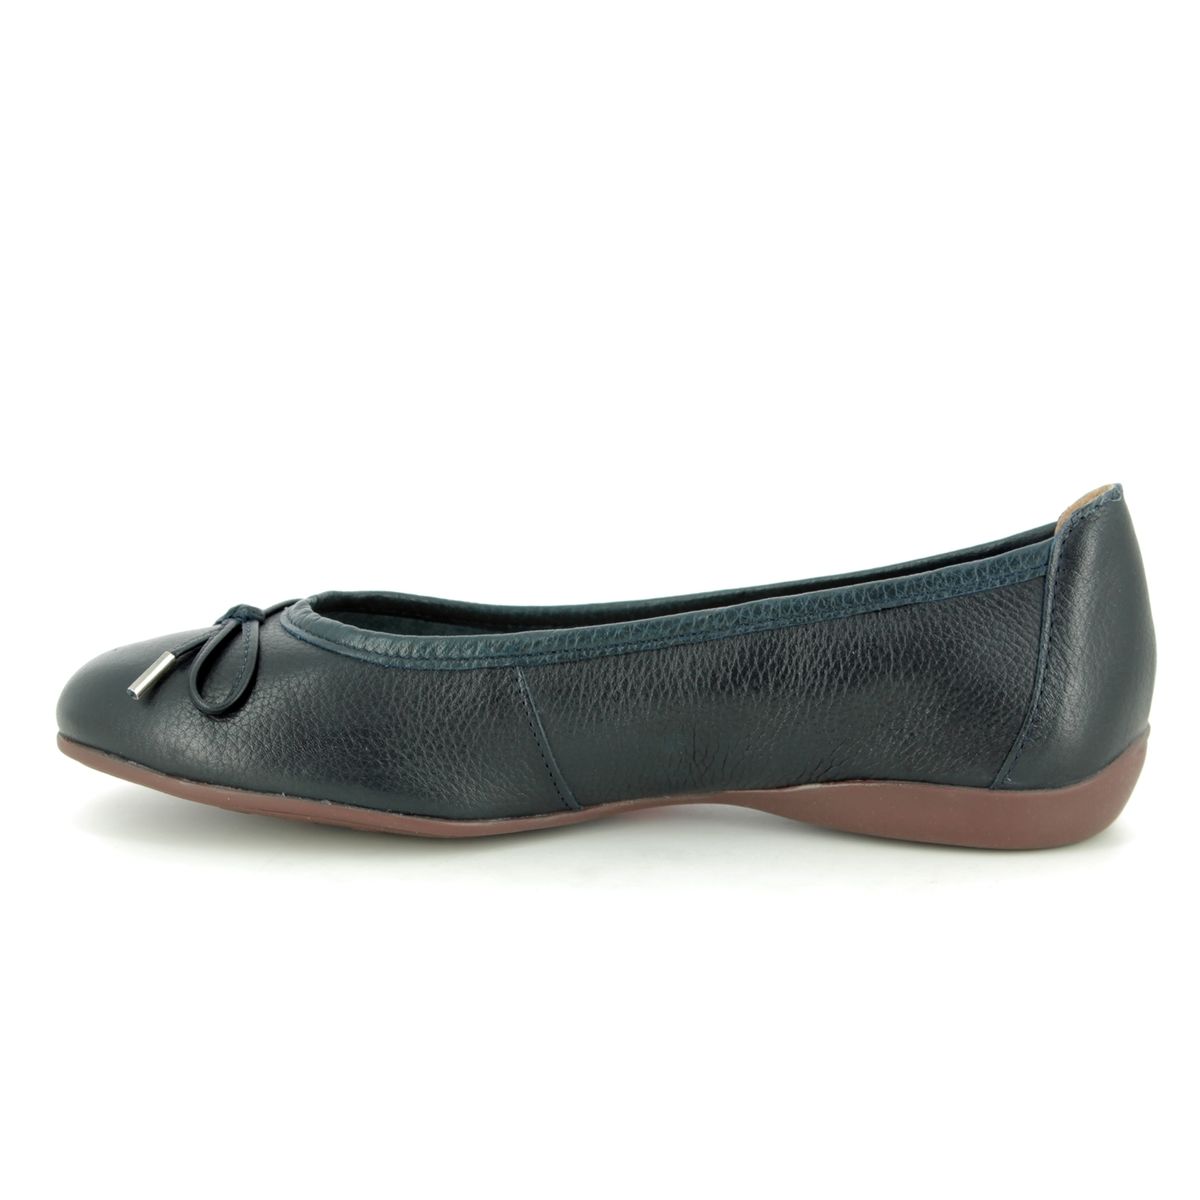 Begg Exclusive Gambi Navy Leather Womens pumps M6536-70